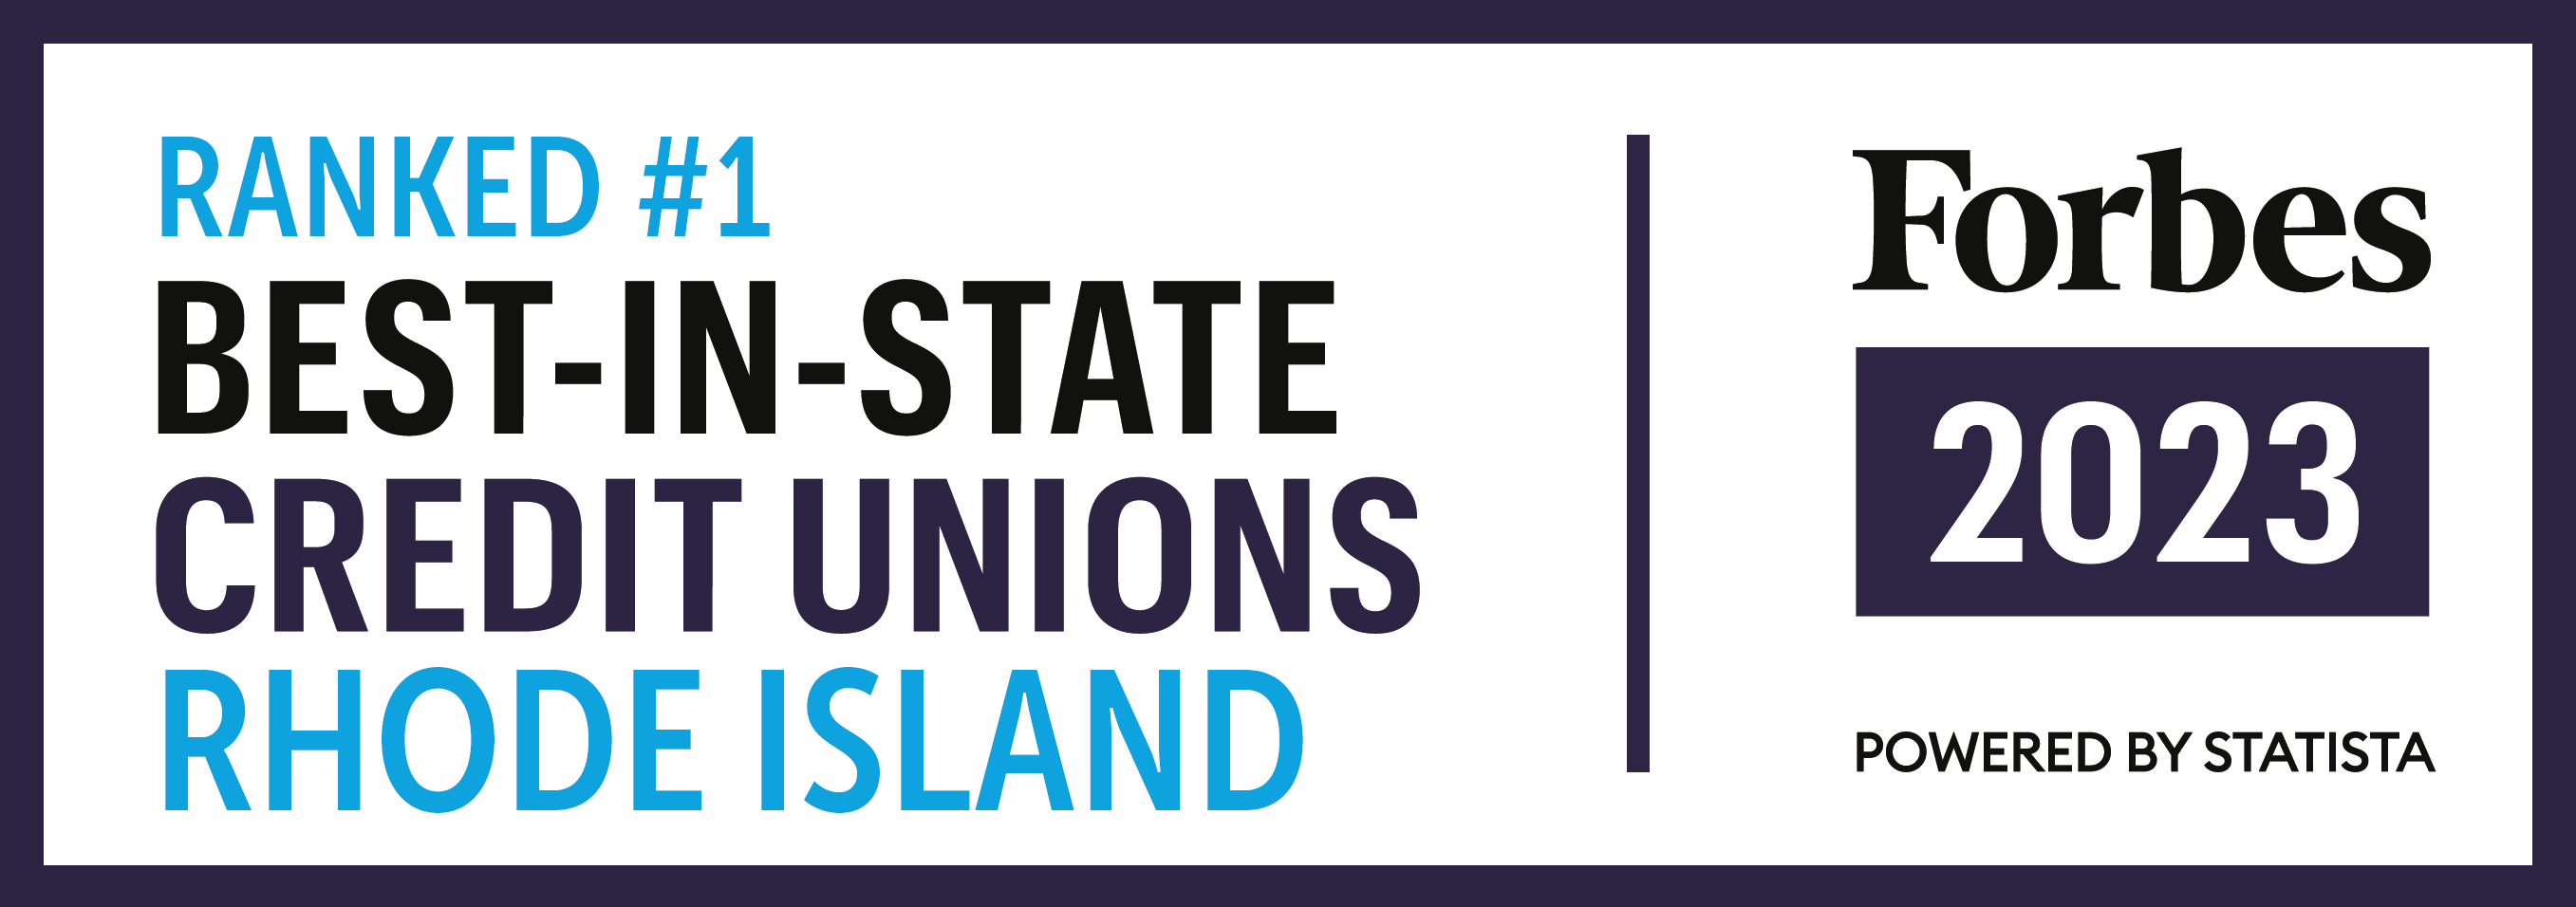 Forbes 2023: Ranked #1 Best-in-state Credit Unions Rhode Island